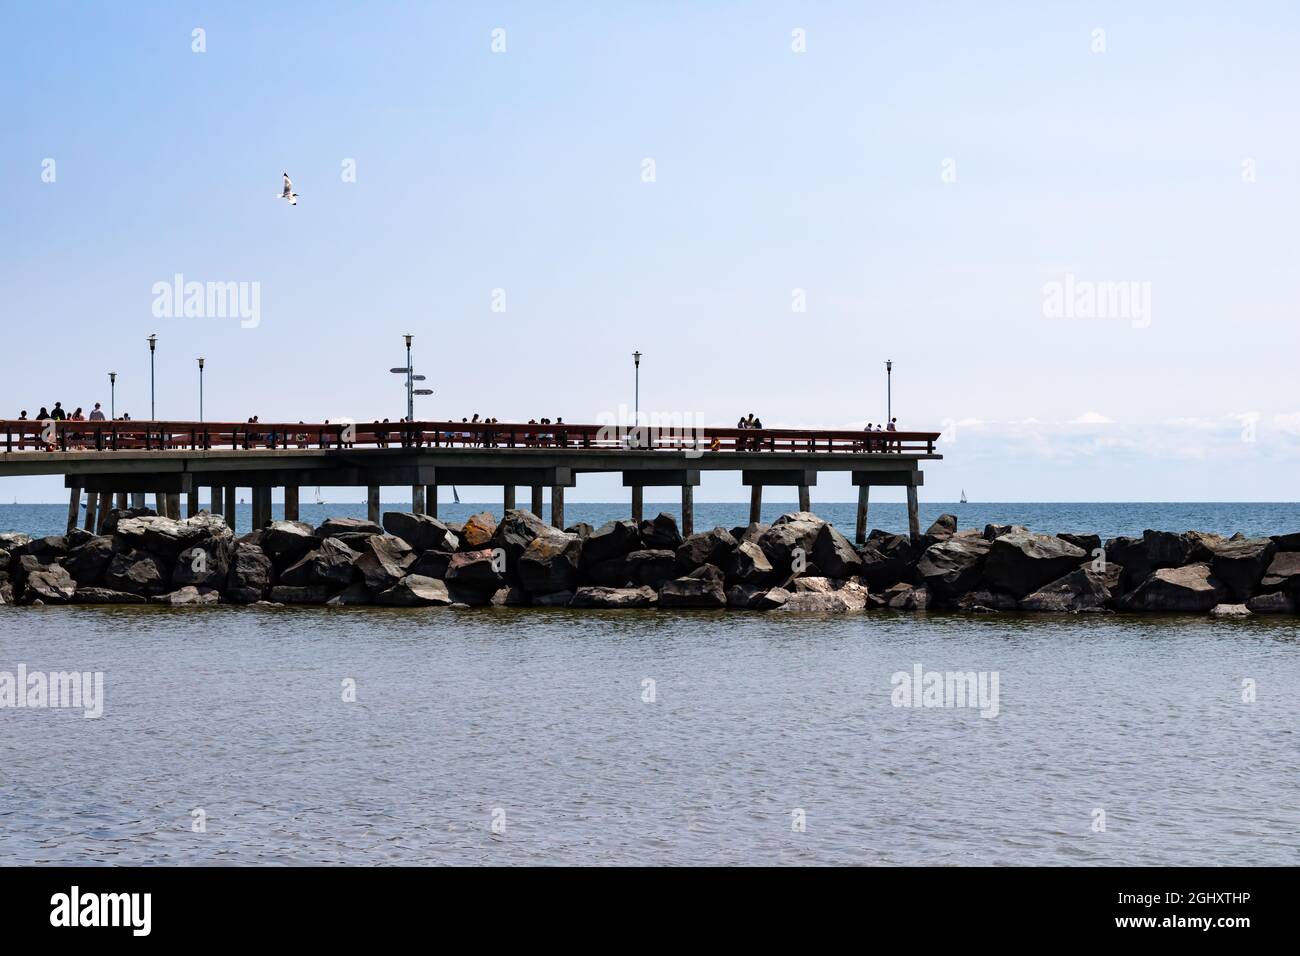 Toronto, Ontario, Canada - July 31 2021: People on a concrete and wooden pier that overlooks Lake Ontario on the Toronto Islands. Above rocks. Stock Photo